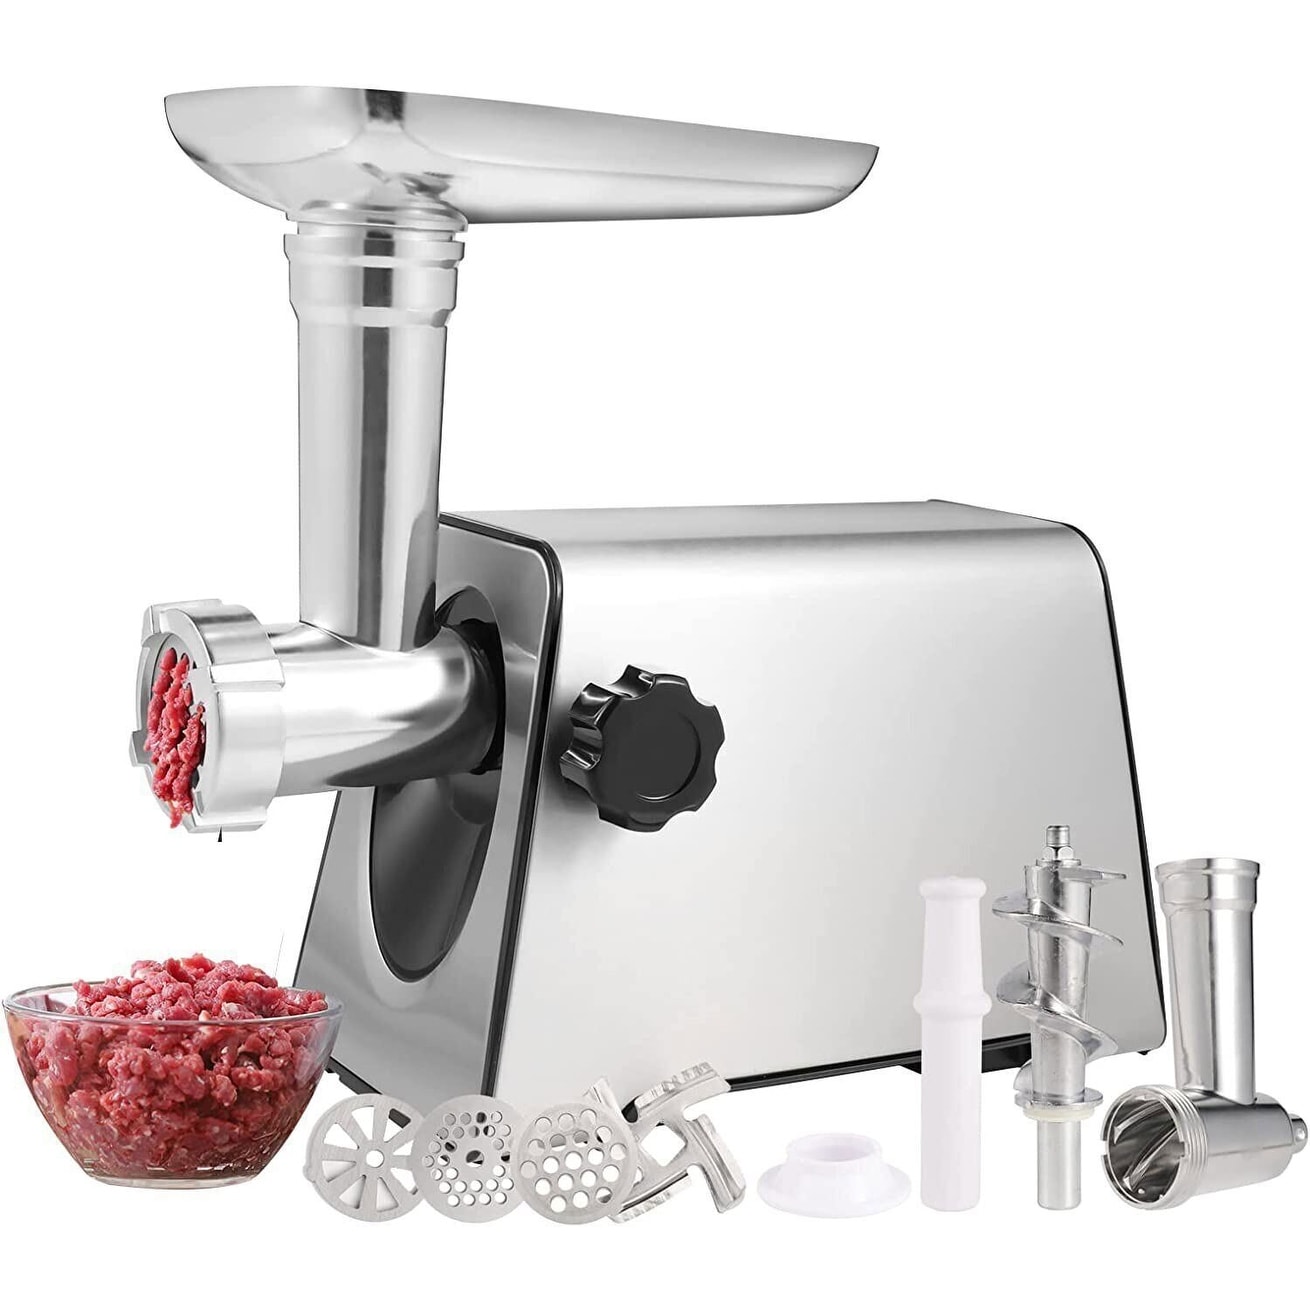 Simple Deluxe Electric Meat Grinder, Heavy Duty Meat Mincer, Food Grinder with Sausage & Kubbe Kit, 3 Grinder Plates, 800W Power